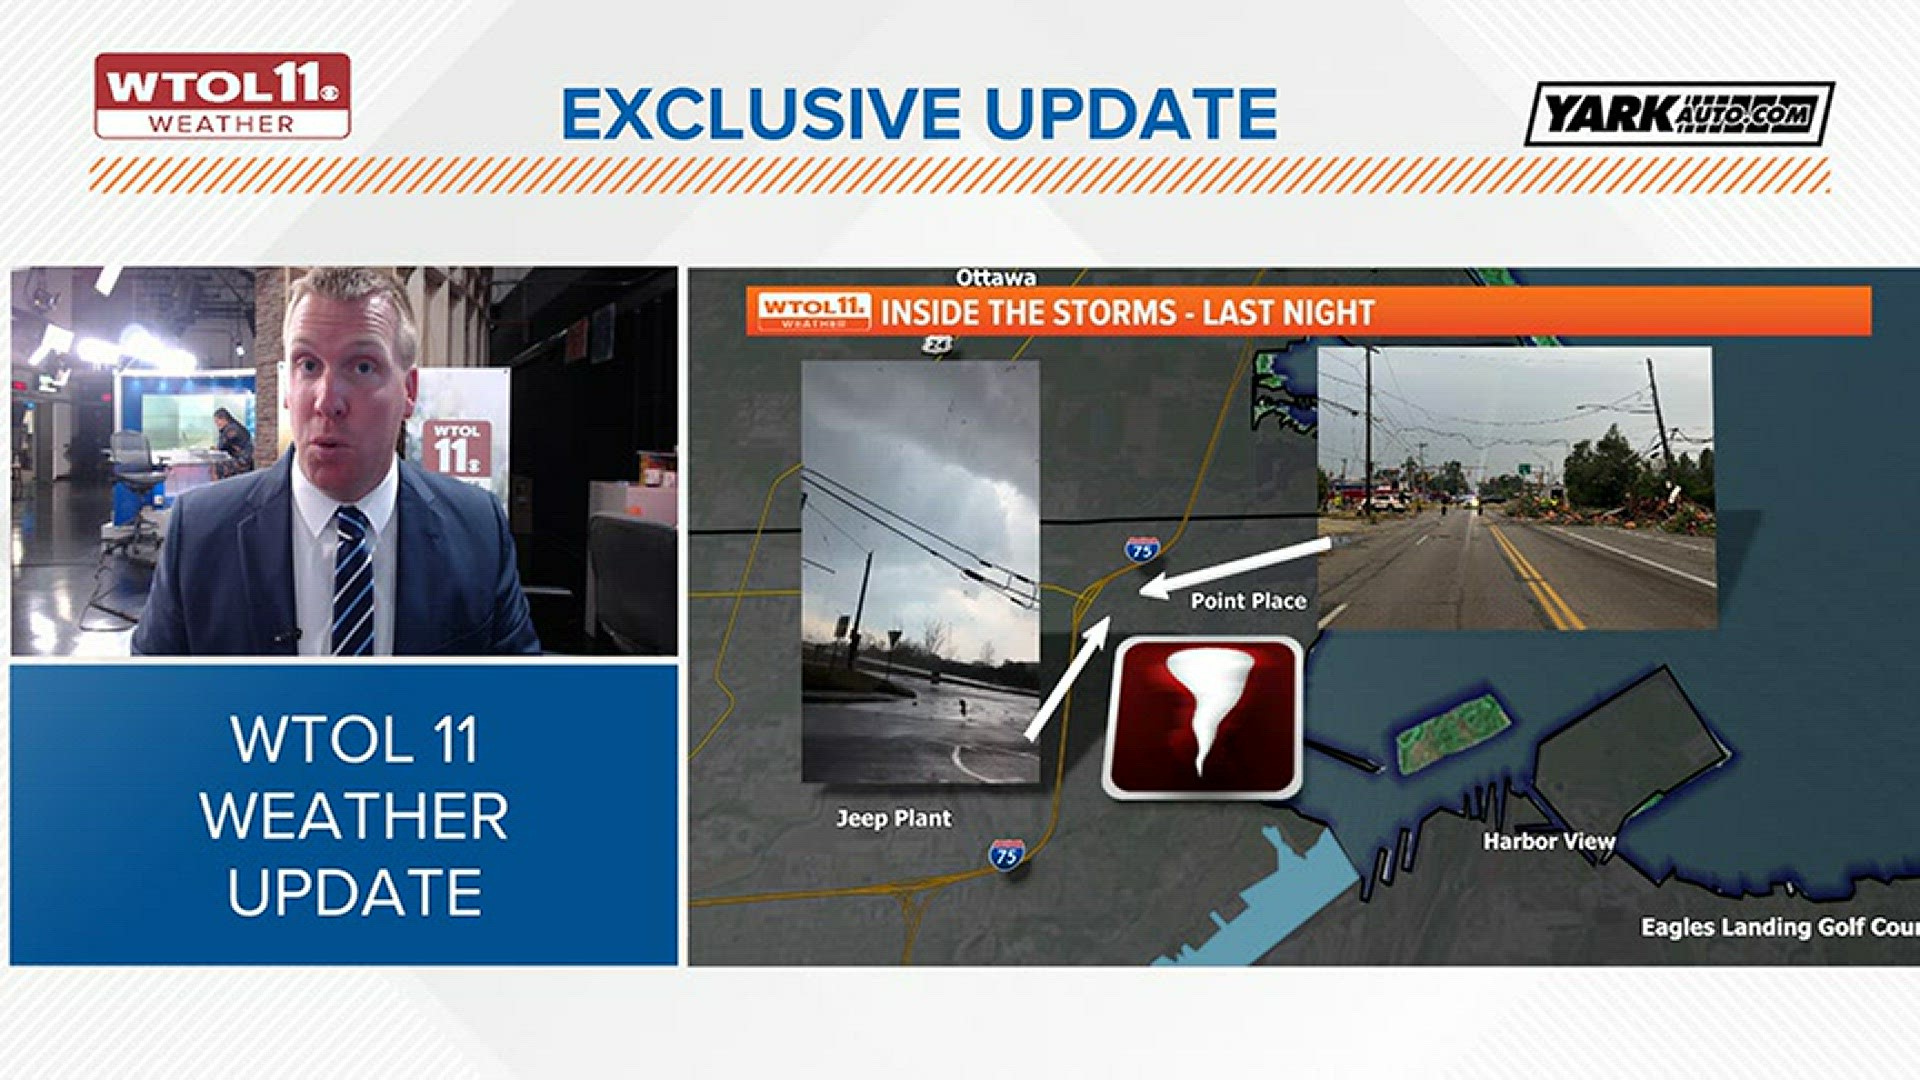 WTOL 11 meteorologist Ryan Wichman recaps Thursday night's storms and tornado, which caused significant damage.